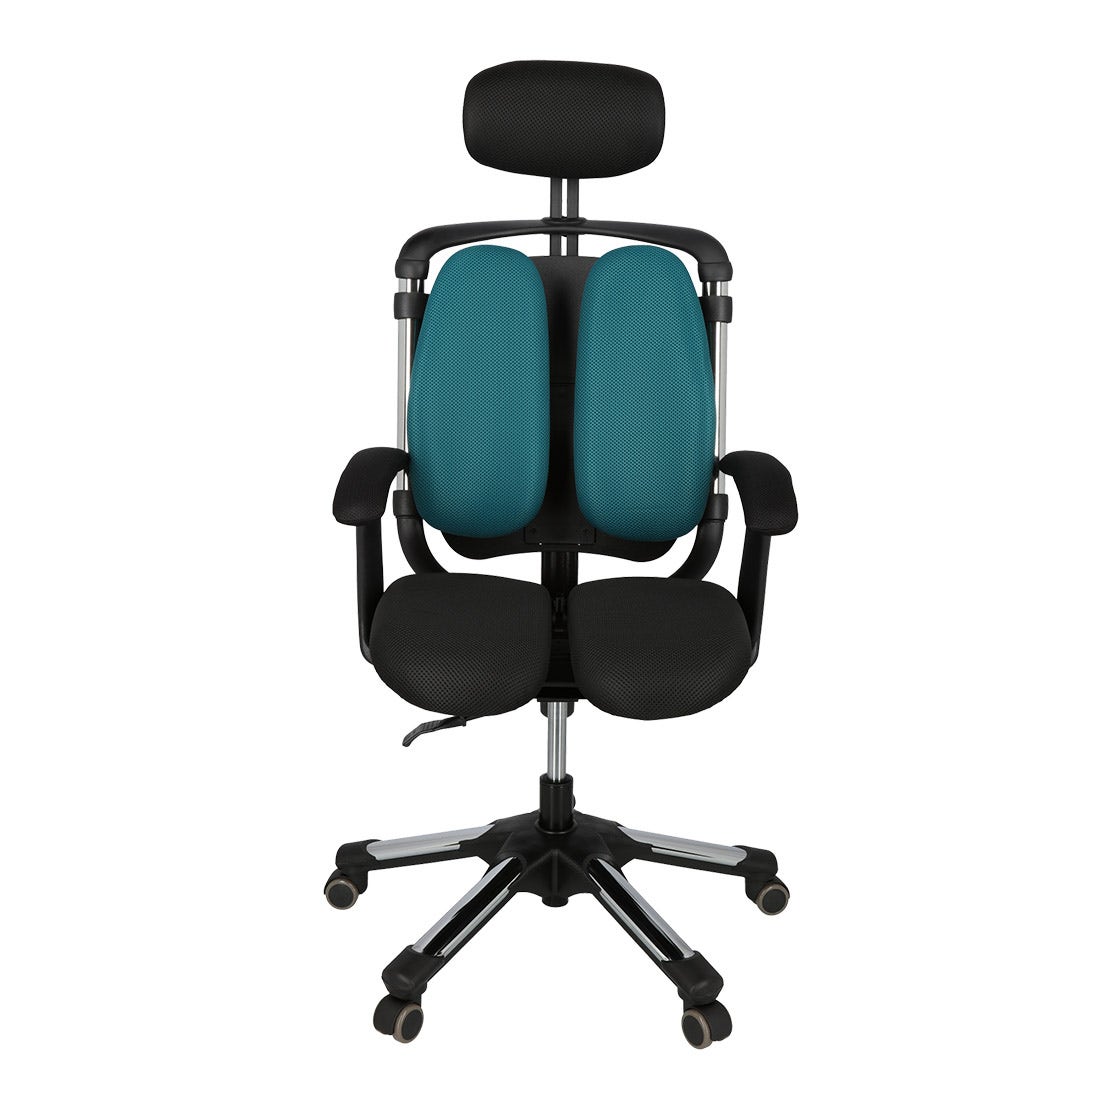 39014952-furniture-home-office-gaming-office-chair-01